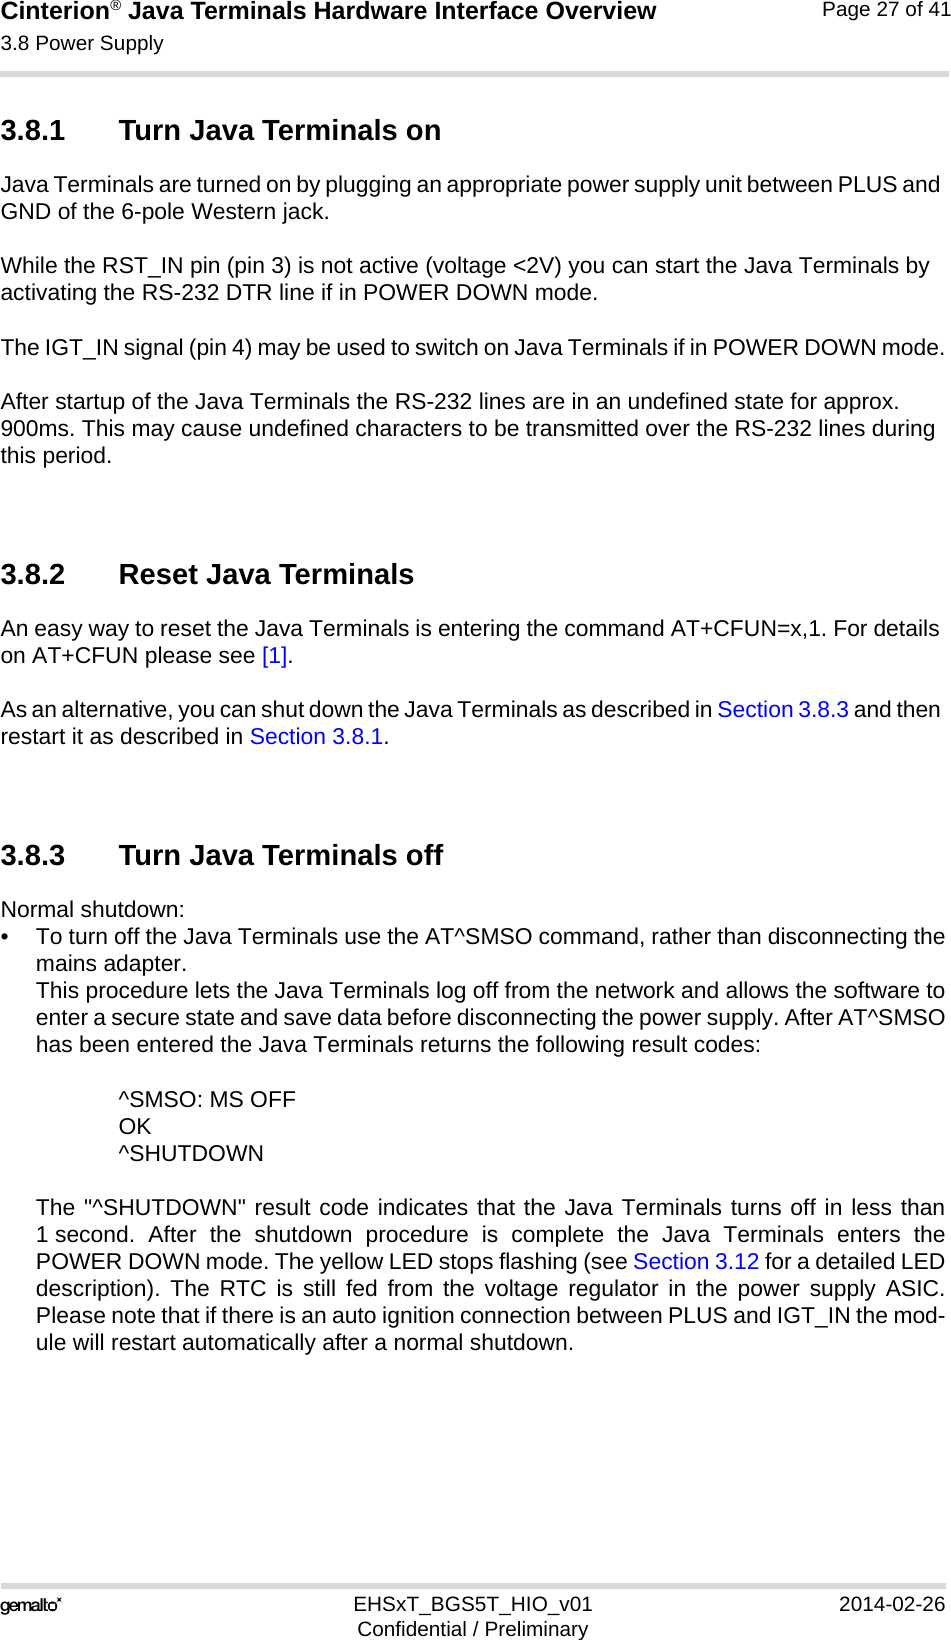 Cinterion® Java Terminals Hardware Interface Overview3.8 Power Supply32EHSxT_BGS5T_HIO_v01 2014-02-26Confidential / PreliminaryPage 27 of 413.8.1 Turn Java Terminals onJava Terminals are turned on by plugging an appropriate power supply unit between PLUS and GND of the 6-pole Western jack. While the RST_IN pin (pin 3) is not active (voltage &lt;2V) you can start the Java Terminals by activating the RS-232 DTR line if in POWER DOWN mode.The IGT_IN signal (pin 4) may be used to switch on Java Terminals if in POWER DOWN mode.After startup of the Java Terminals the RS-232 lines are in an undefined state for approx. 900ms. This may cause undefined characters to be transmitted over the RS-232 lines during this period.3.8.2 Reset Java TerminalsAn easy way to reset the Java Terminals is entering the command AT+CFUN=x,1. For details on AT+CFUN please see [1].As an alternative, you can shut down the Java Terminals as described in Section 3.8.3 and then restart it as described in Section 3.8.1.3.8.3 Turn Java Terminals offNormal shutdown:• To turn off the Java Terminals use the AT^SMSO command, rather than disconnecting themains adapter. This procedure lets the Java Terminals log off from the network and allows the software toenter a secure state and save data before disconnecting the power supply. After AT^SMSOhas been entered the Java Terminals returns the following result codes: ^SMSO: MS OFFOK^SHUTDOWNThe &quot;^SHUTDOWN&quot; result code indicates that the Java Terminals turns off in less than1 second. After the shutdown procedure is complete the Java Terminals enters thePOWER DOWN mode. The yellow LED stops flashing (see Section 3.12 for a detailed LEDdescription). The RTC is still fed from the voltage regulator in the power supply ASIC.Please note that if there is an auto ignition connection between PLUS and IGT_IN the mod-ule will restart automatically after a normal shutdown.